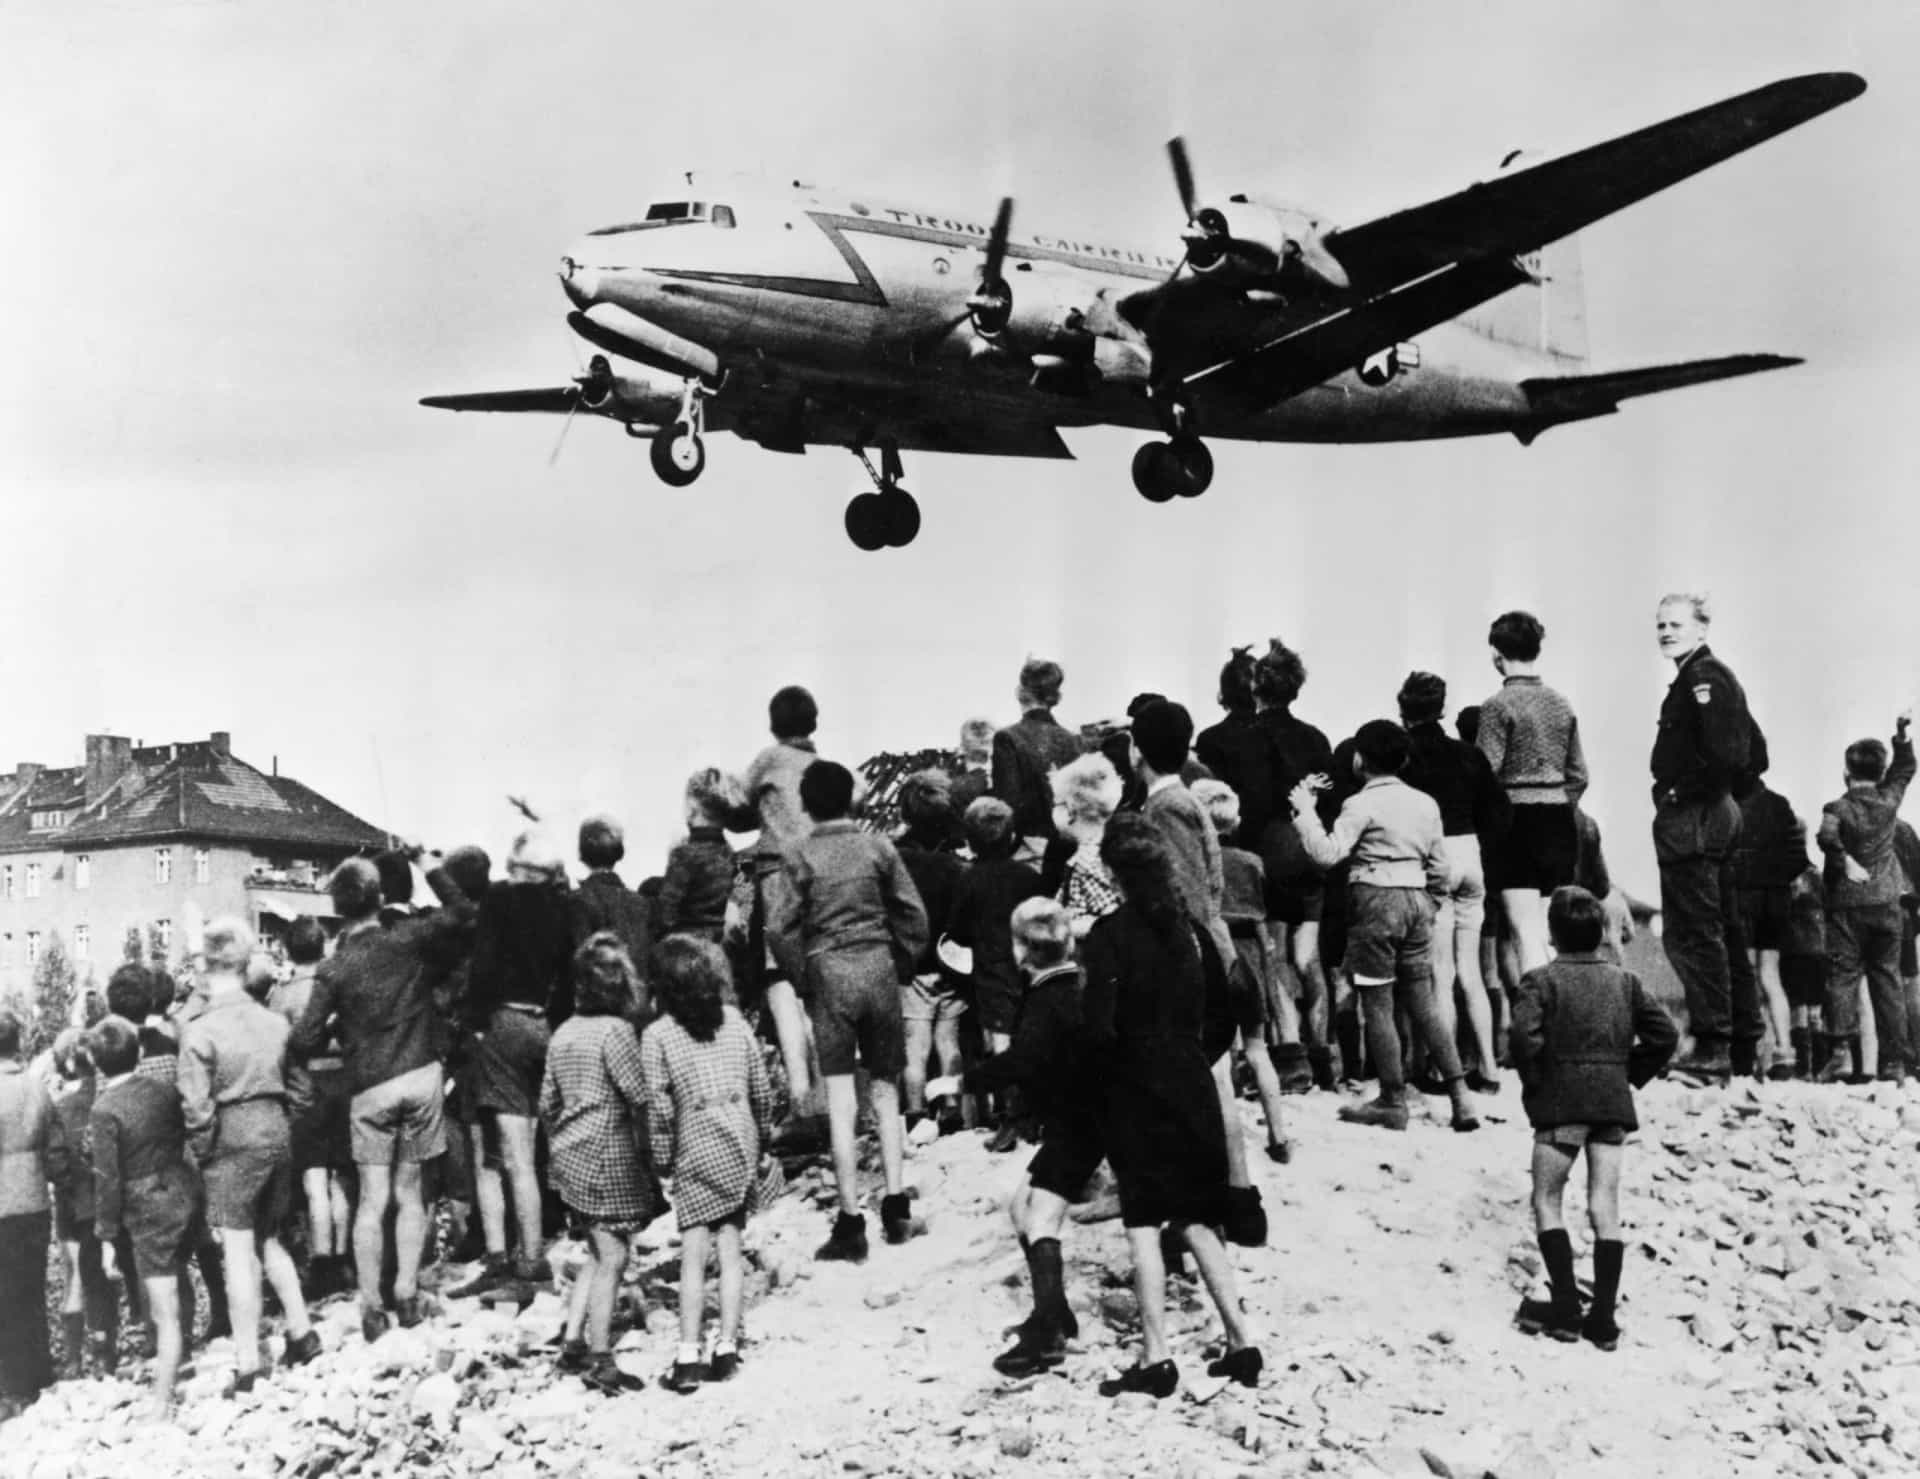 <p>The <a href="https://www.starsinsider.com/lifestyle/429693/remembering-the-berlin-blockade" rel="noopener">Berlin Blockade</a> was one of the first major crises of the Cold War. From June 1948 to May 1949, the Soviet Union blocked the Western Allies' railway, road, and canal access to the sectors of Berlin under Western control. In response, the Berlin Airlift was organized—history's largest air supply campaign. Over the course of the airlift, 2.34 million tons of food, coal, fuel, and other vital supplies were delivered to Berlin's 2.2 million inhabitants. More than 277,000 flights involving 300 aircraft took part in the operation.</p>